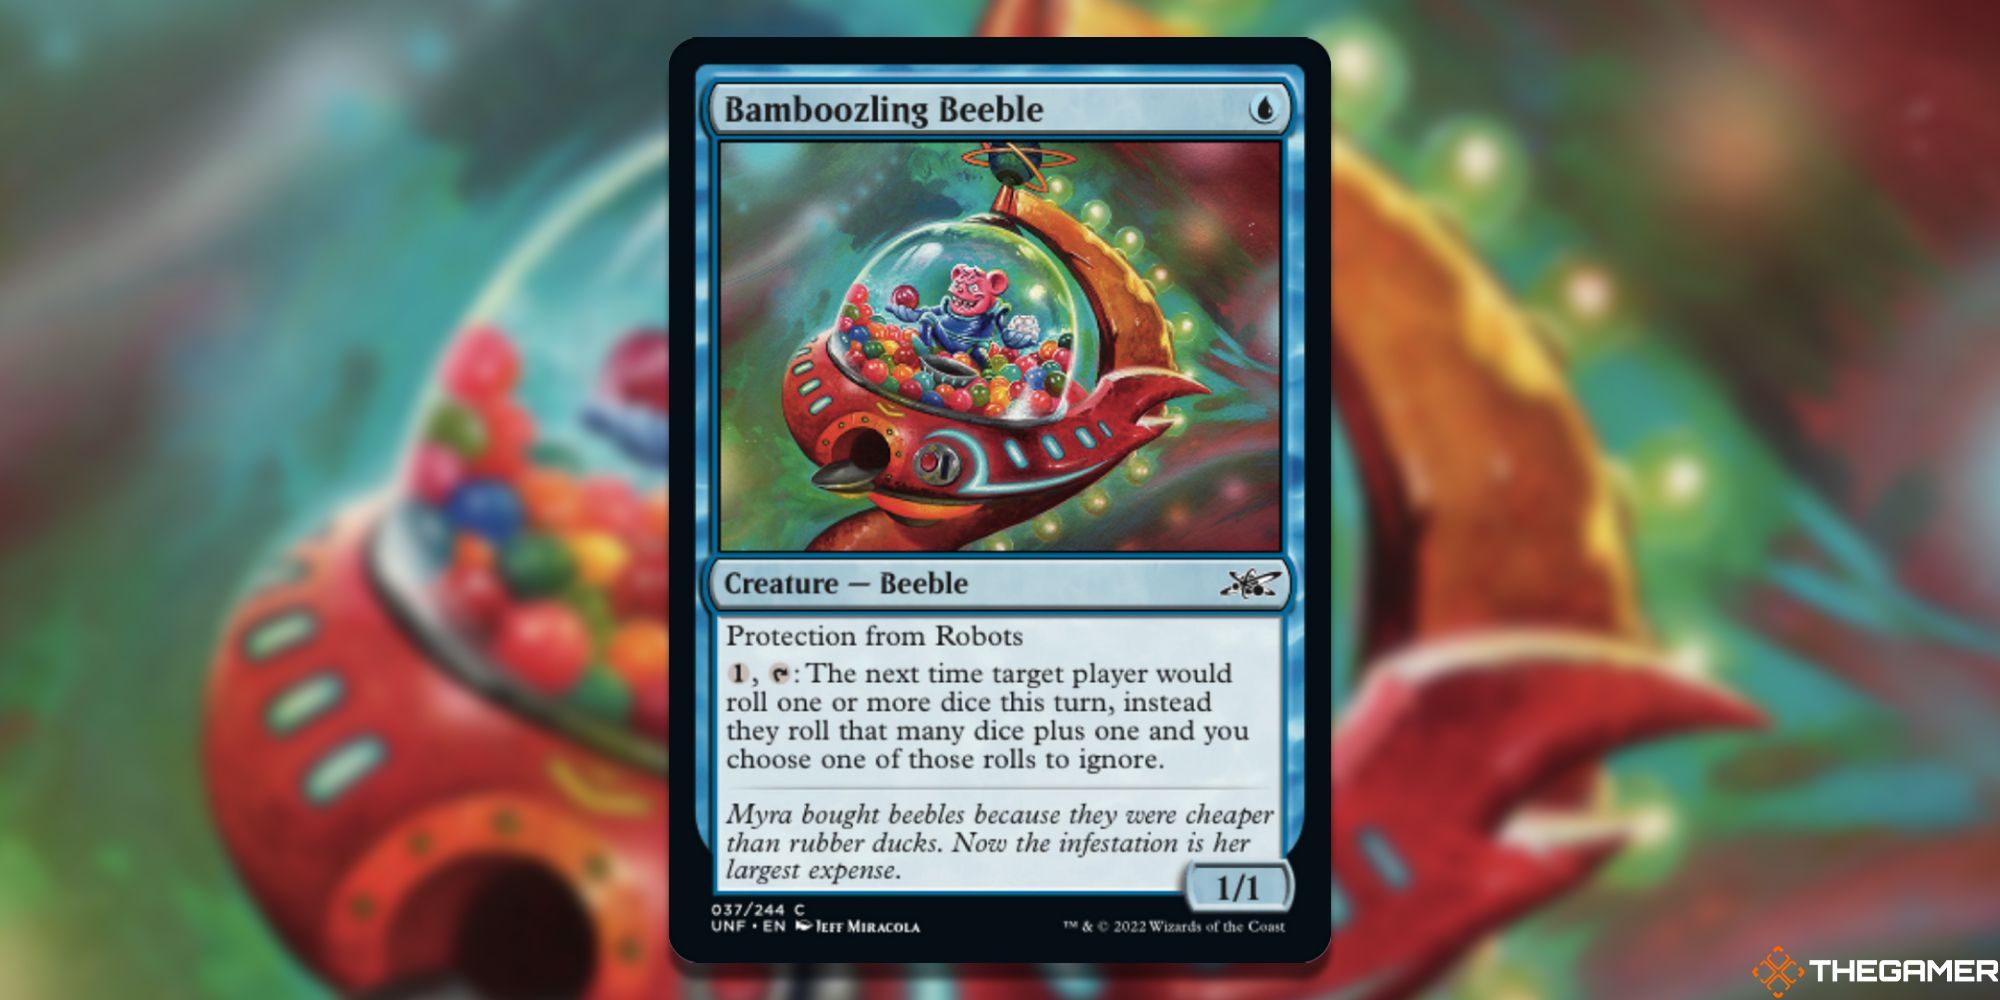 The card Bamboozling Beeble from Magic: the Gathering.